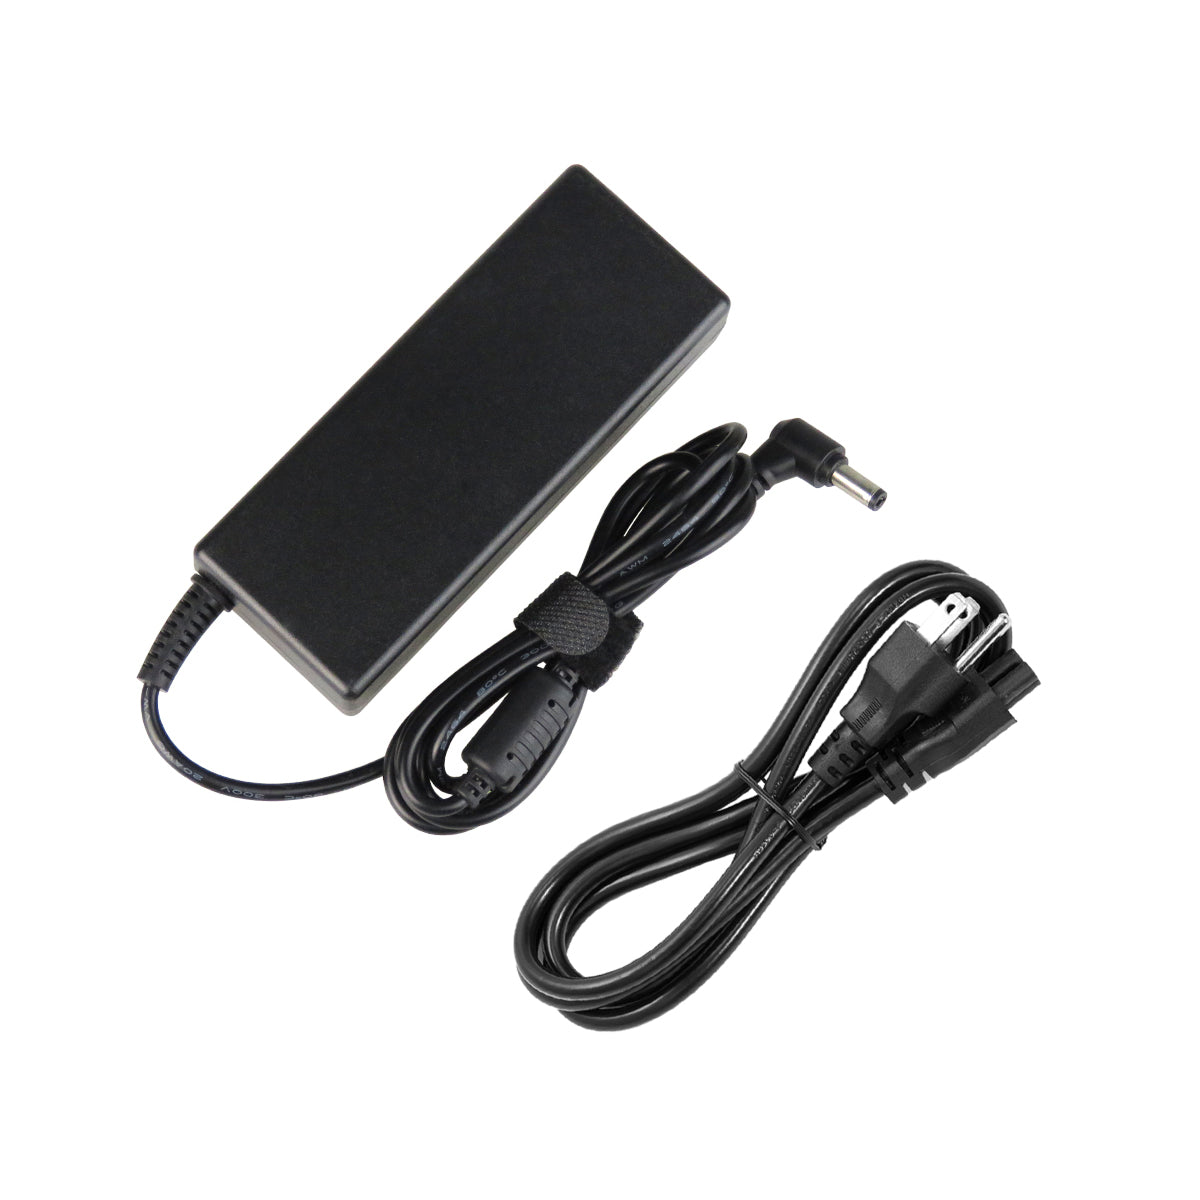 AC Adapter Charger for ASUS X75A-DH31 Notebook.